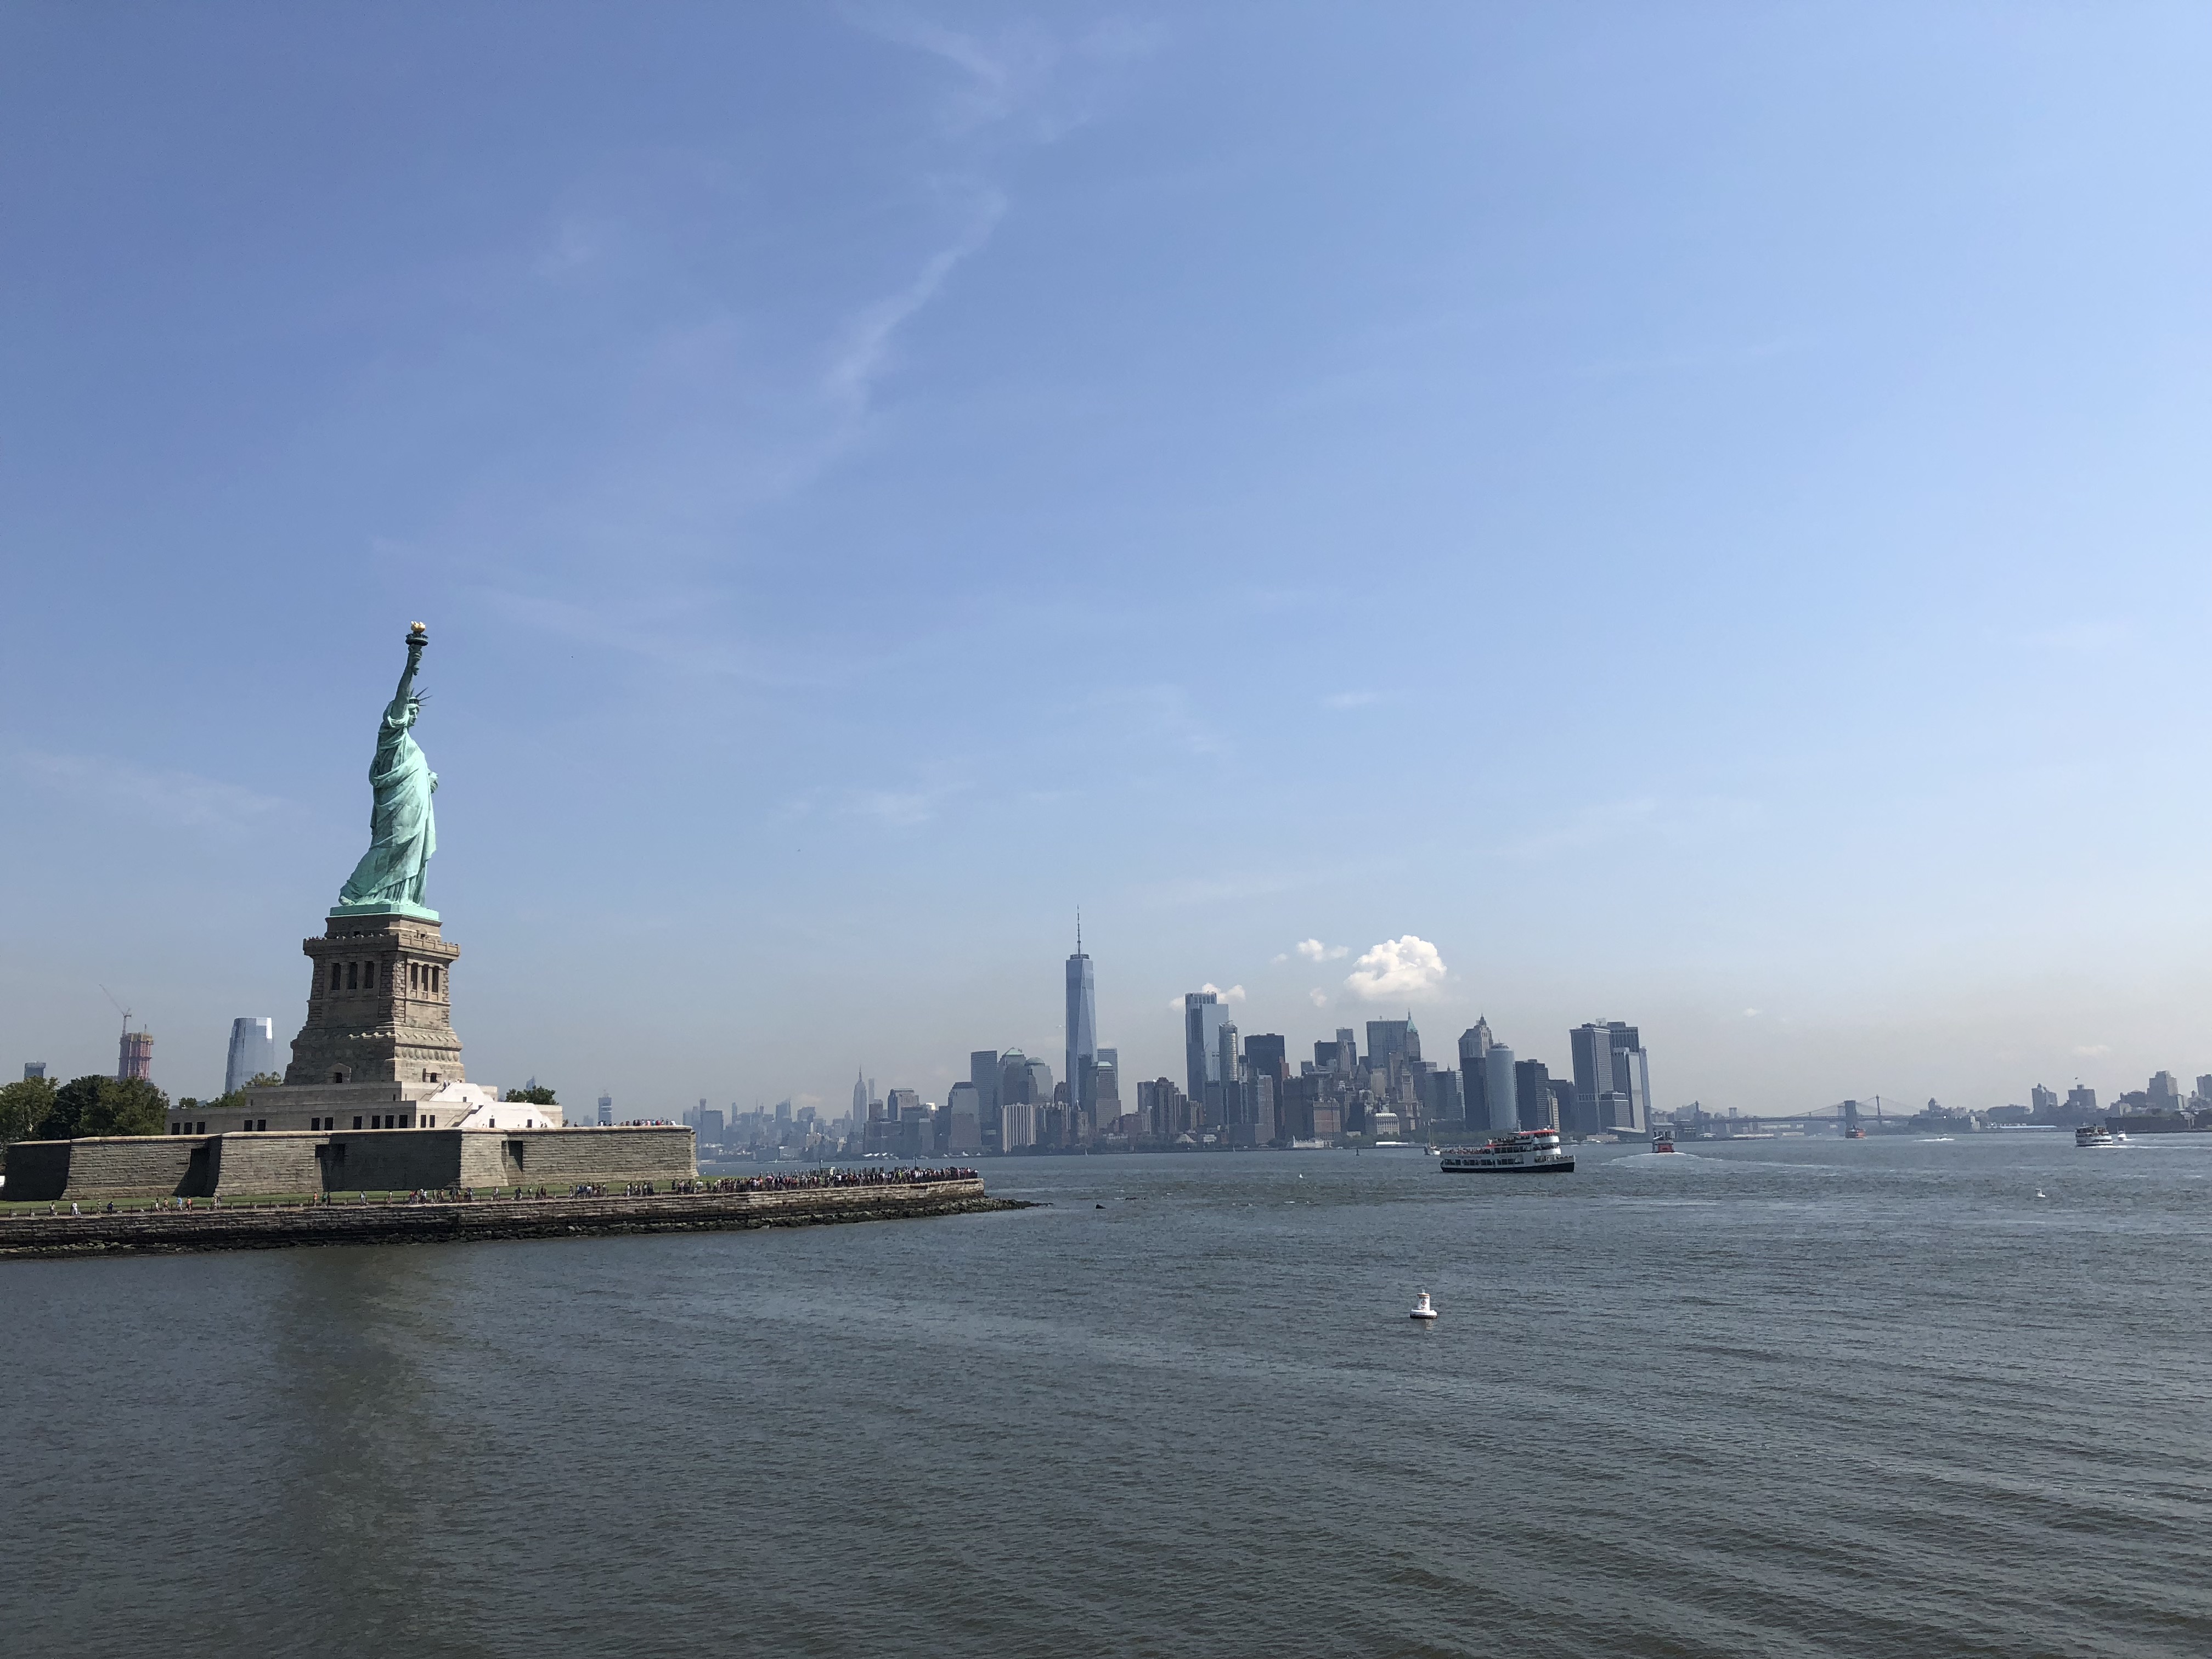 Statue of Liberty with the Manhattan skyline in the background